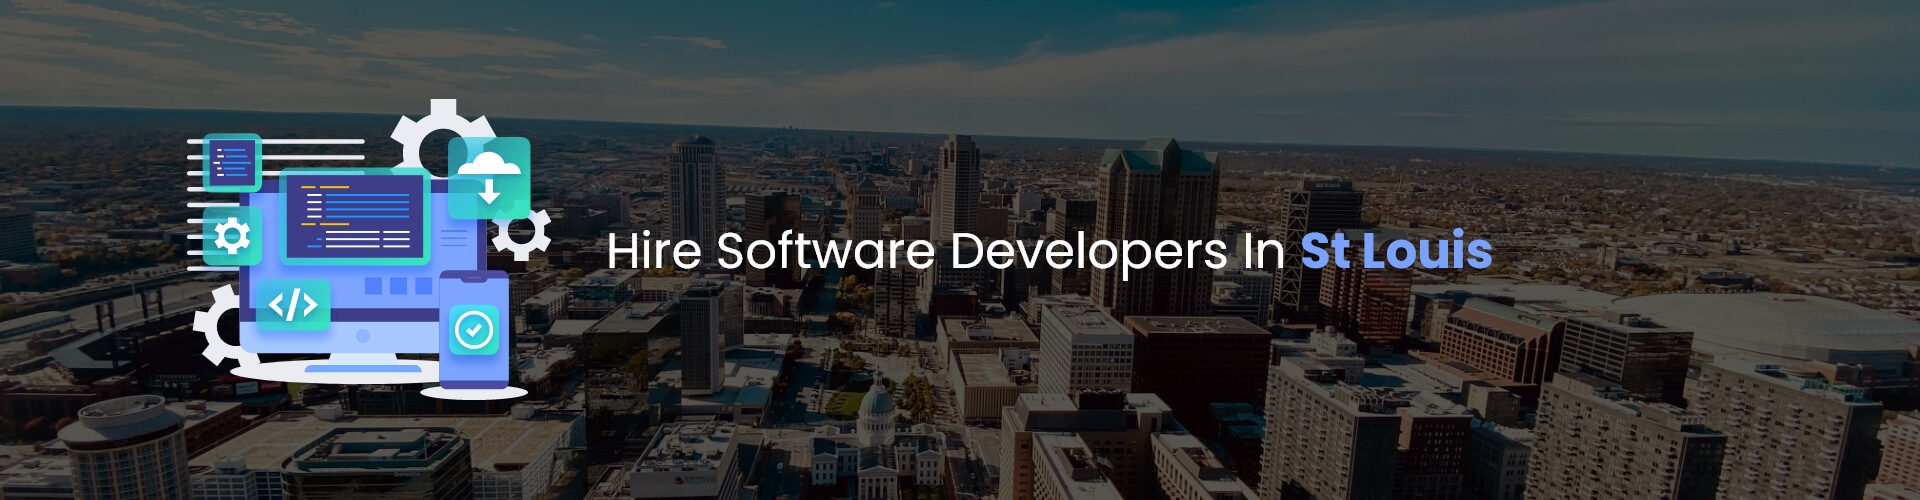 hire software developers in st louis